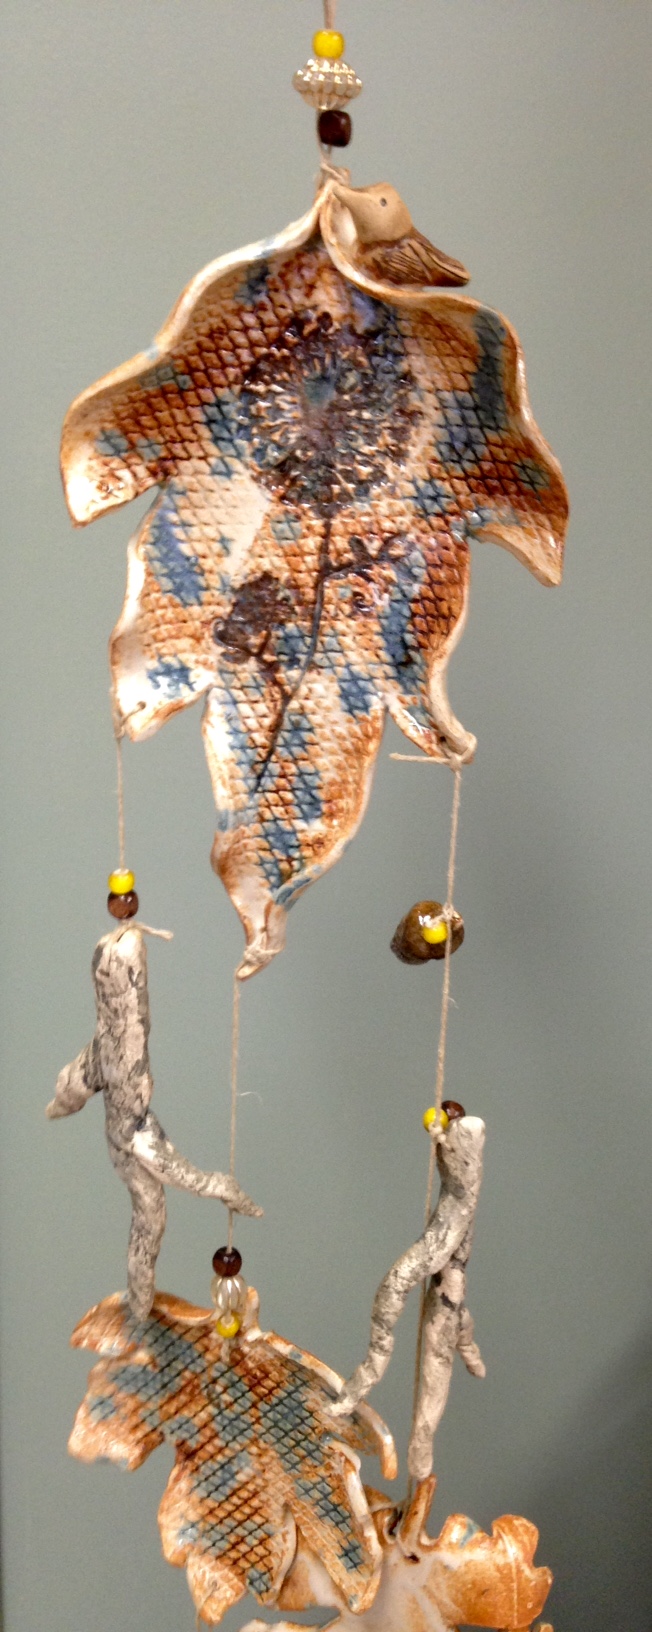 The Randolph Arts Guild offers Parent/Child Clay Wind Chime Class with Brooke Avery